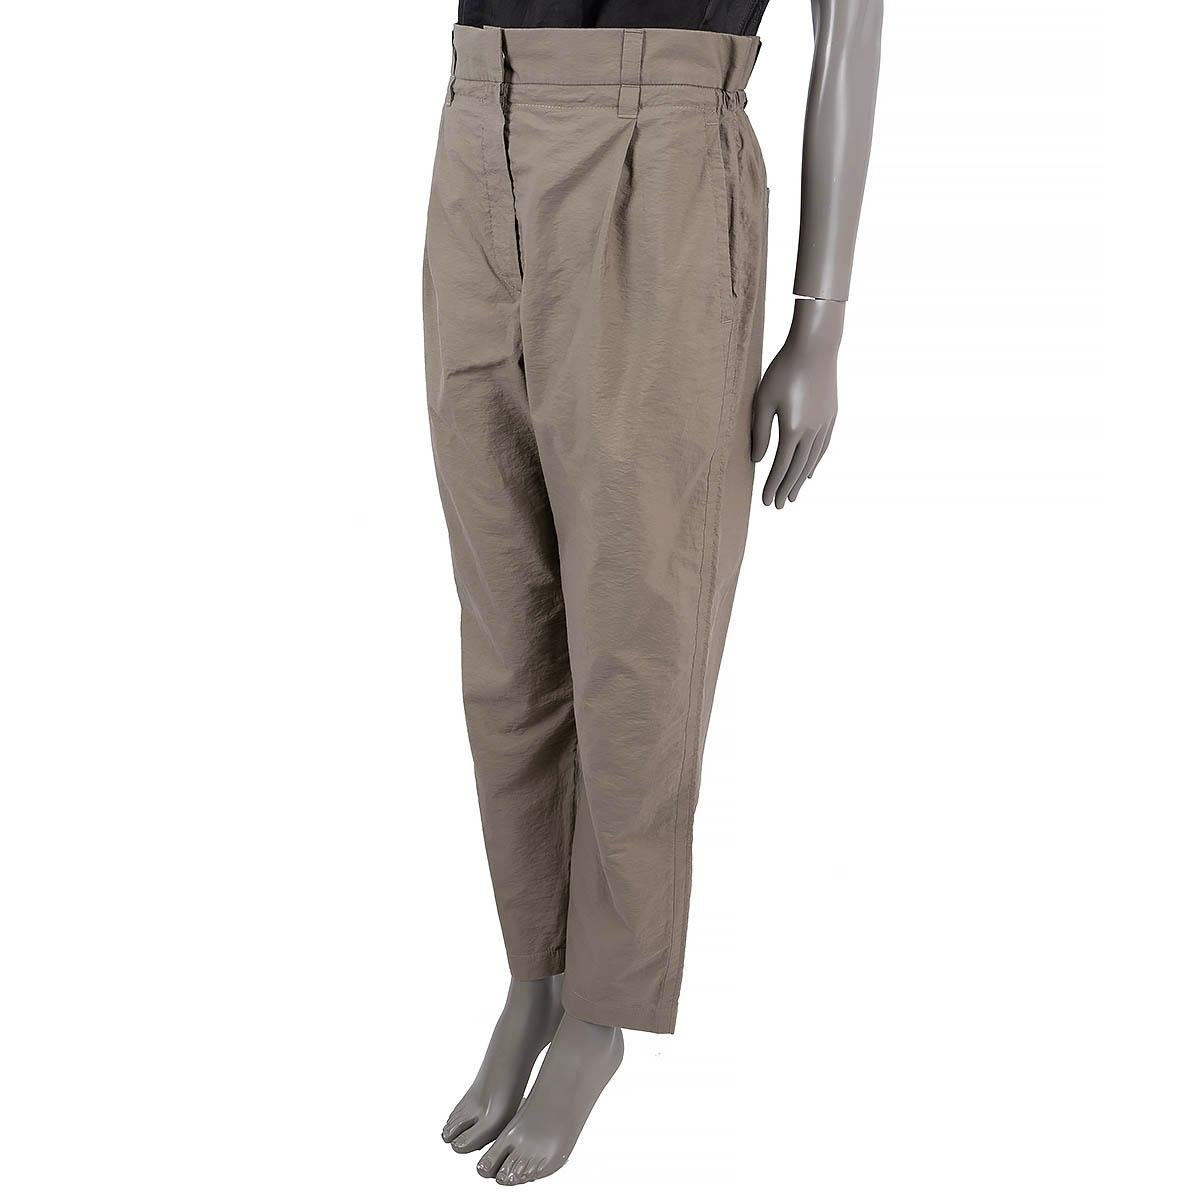 100% authentic Brunello Cucinelli crinkled paperbag waist pants in khaki cotton (75%) and polyamide (43%) with two pockets on the front, two welt pockets on the back. Close with a concealed zipper and one push button on the front. Unlined. Have been